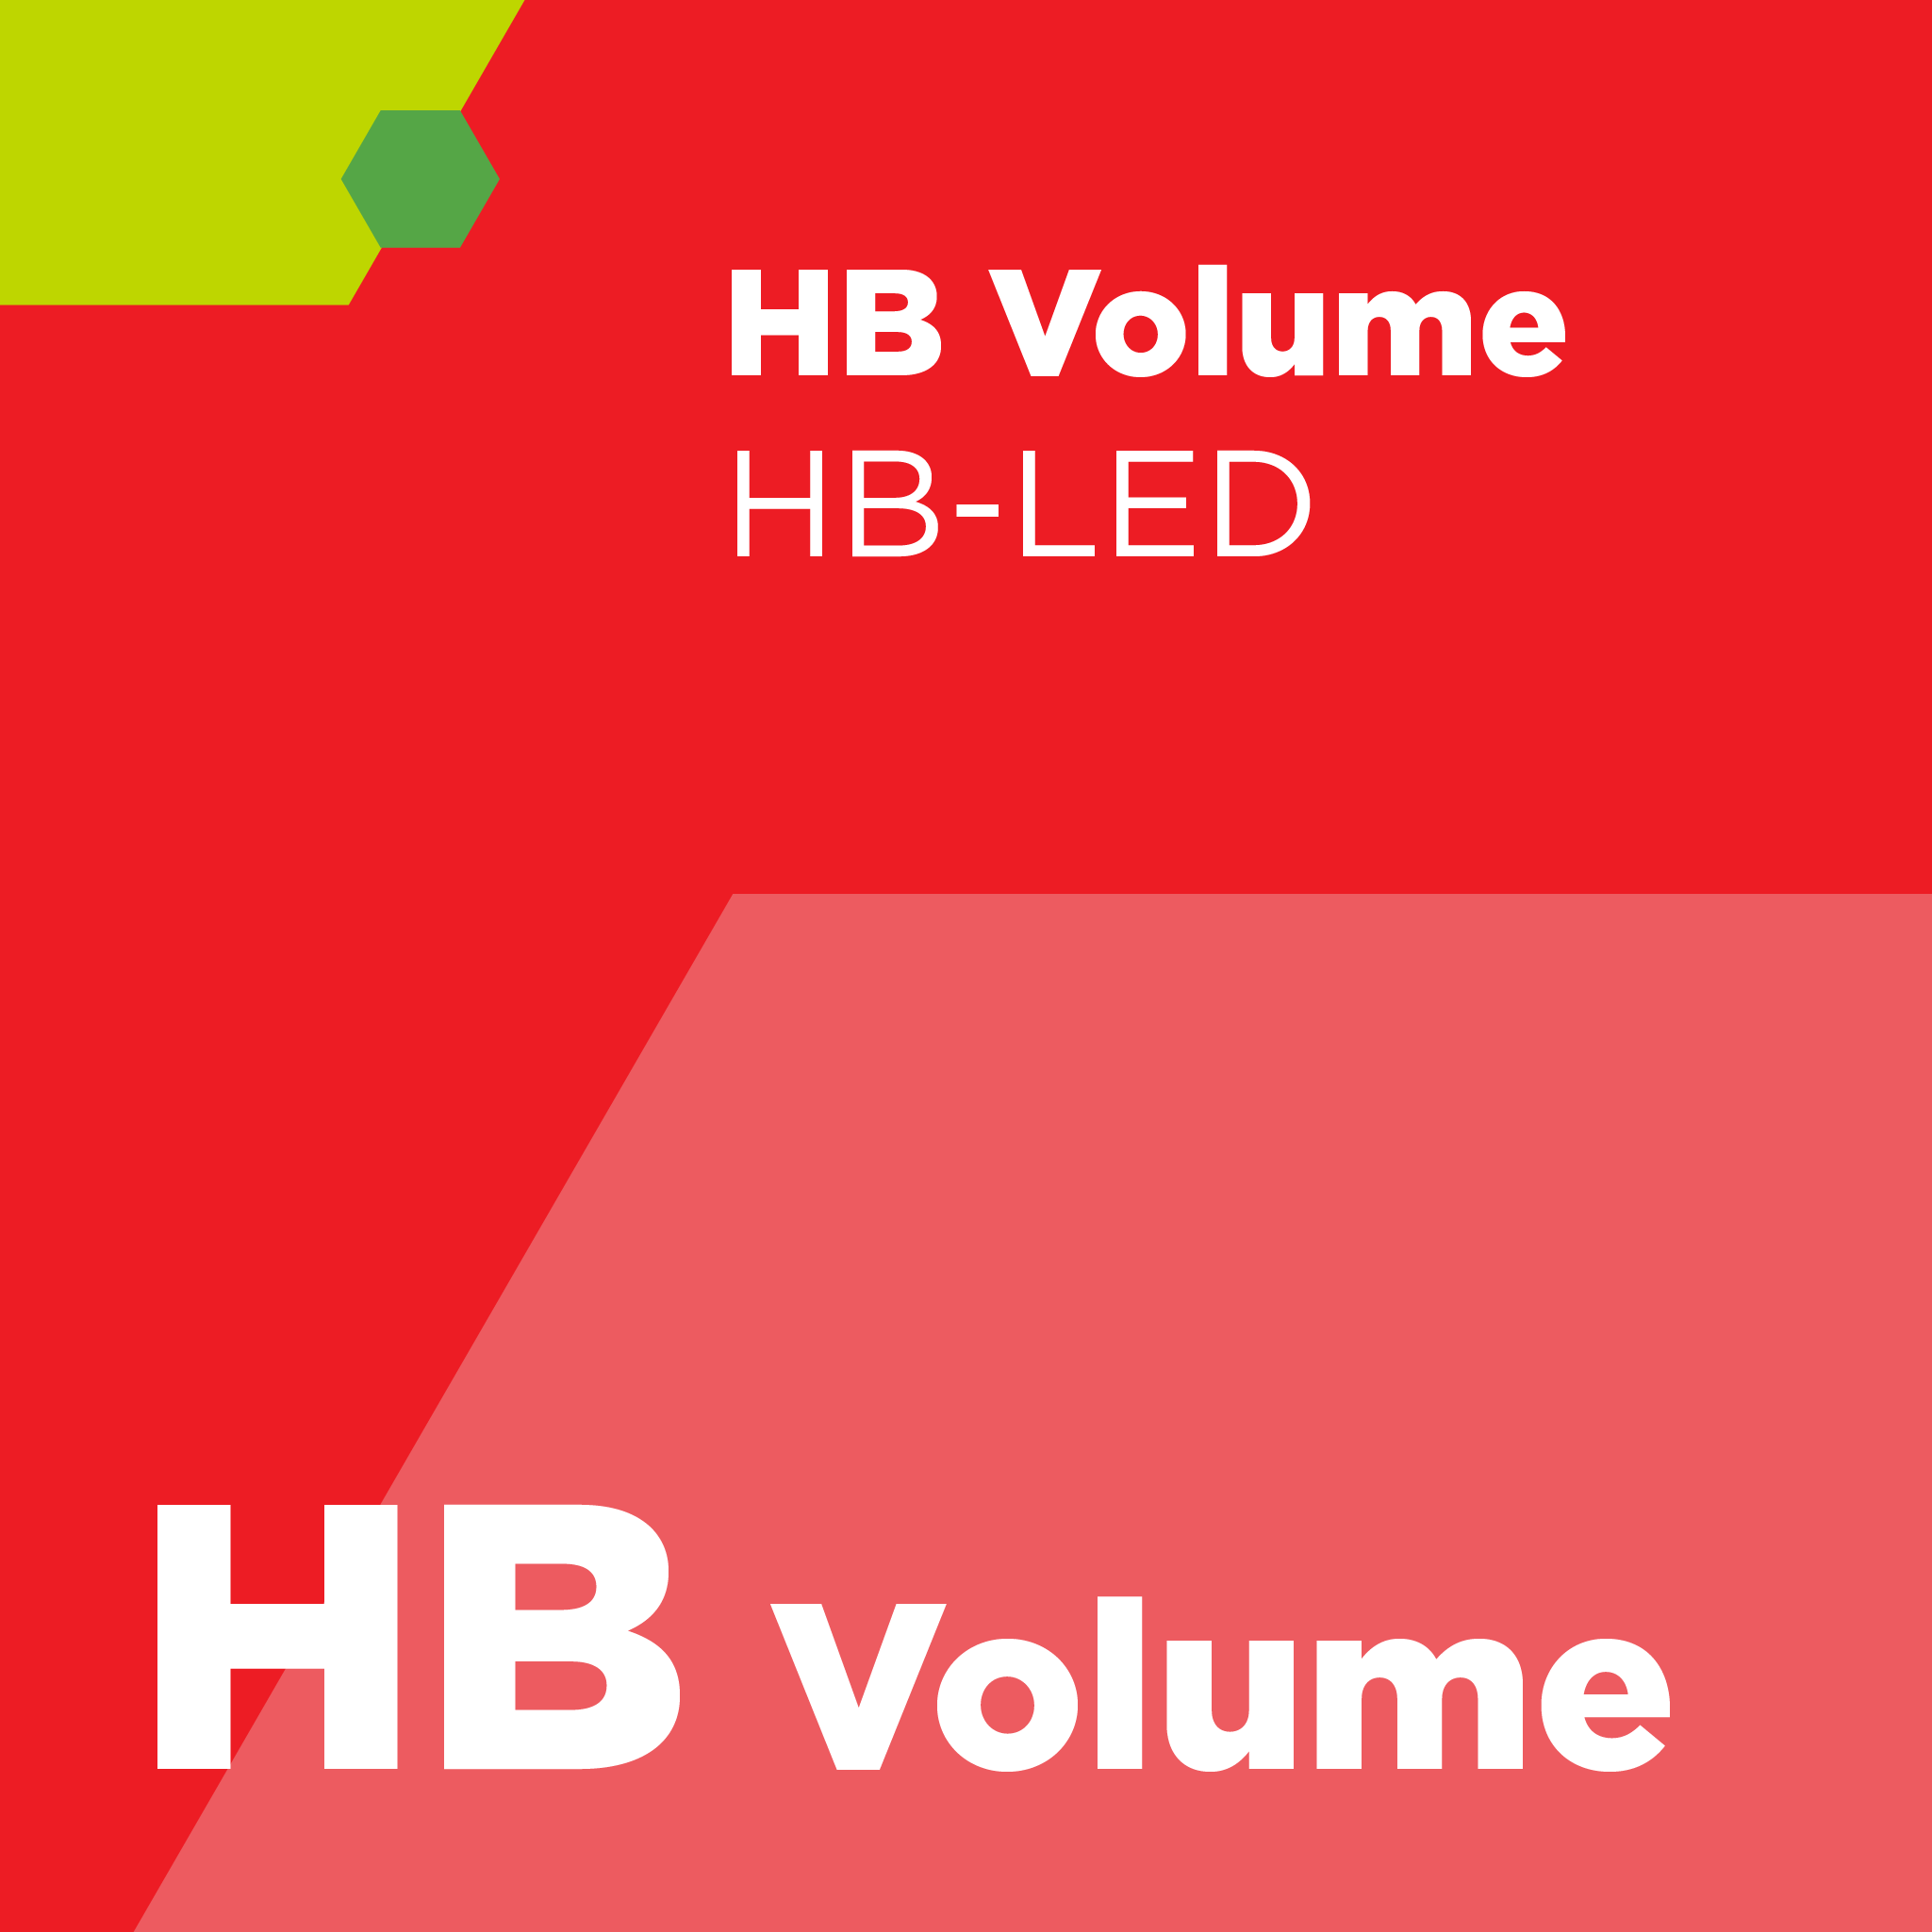 HB00400 - SEMI HB4 - Specification of Communication Interfaces for High Brightness LED Manufacturing Equipment (HB-LED ECI)